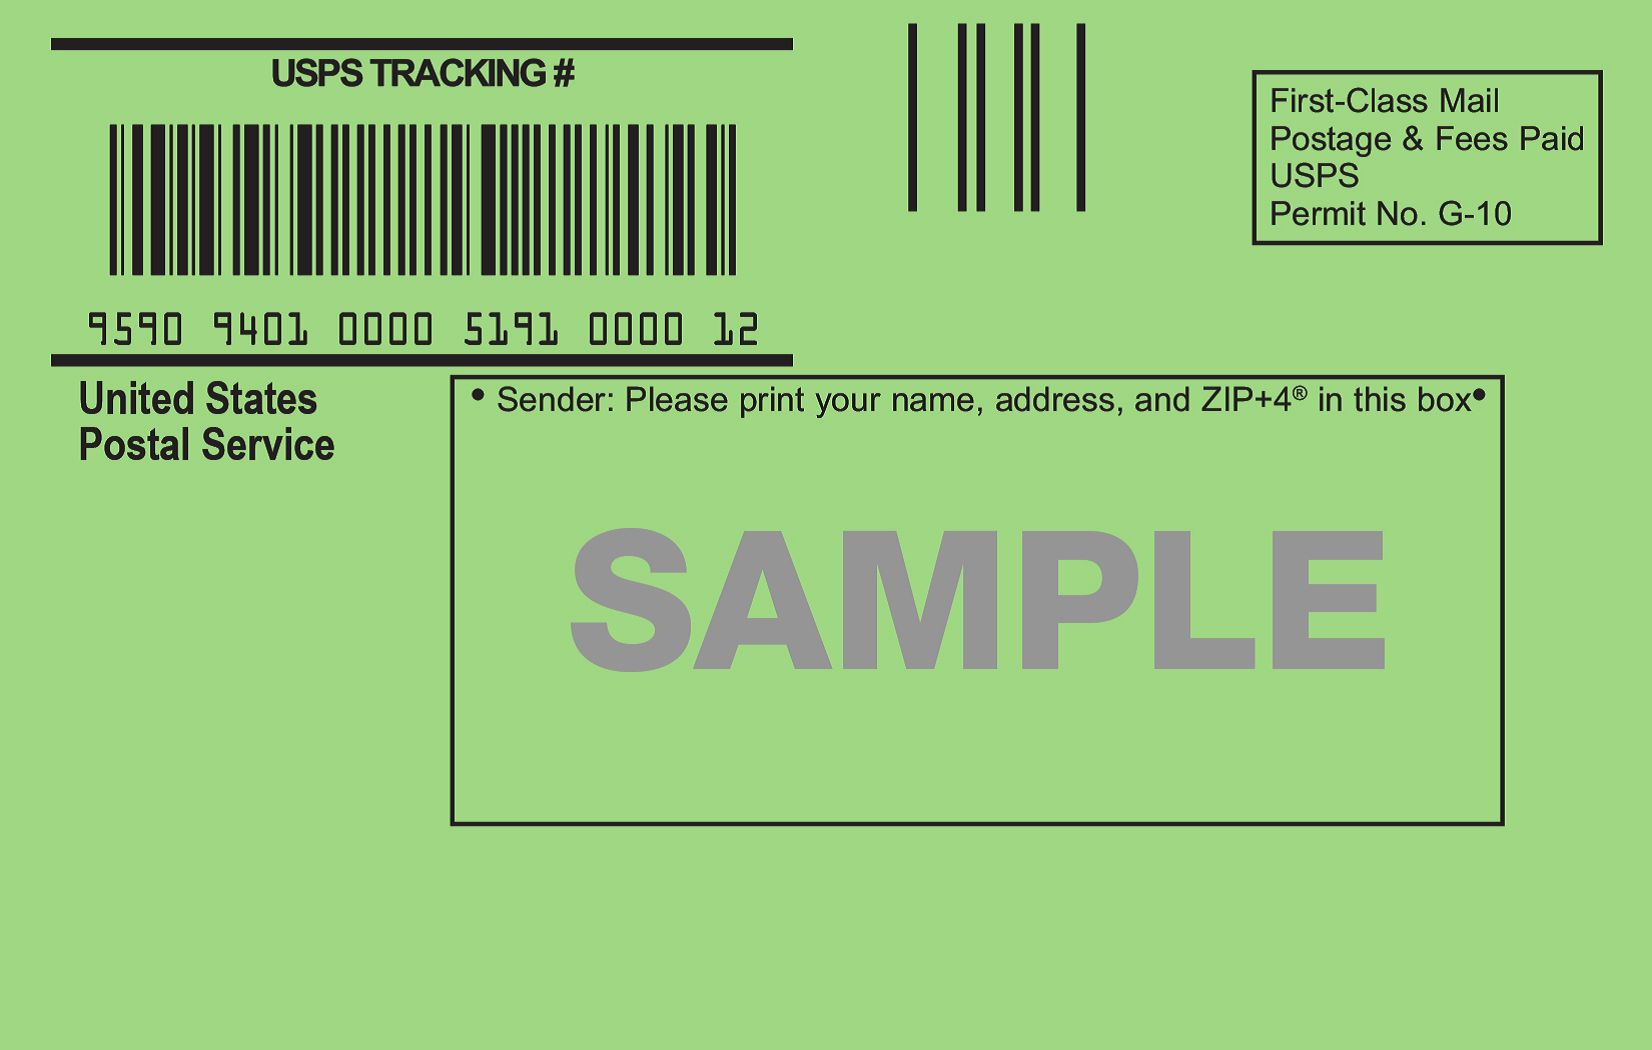 How to track International Packages using USPS Tracking Numbers